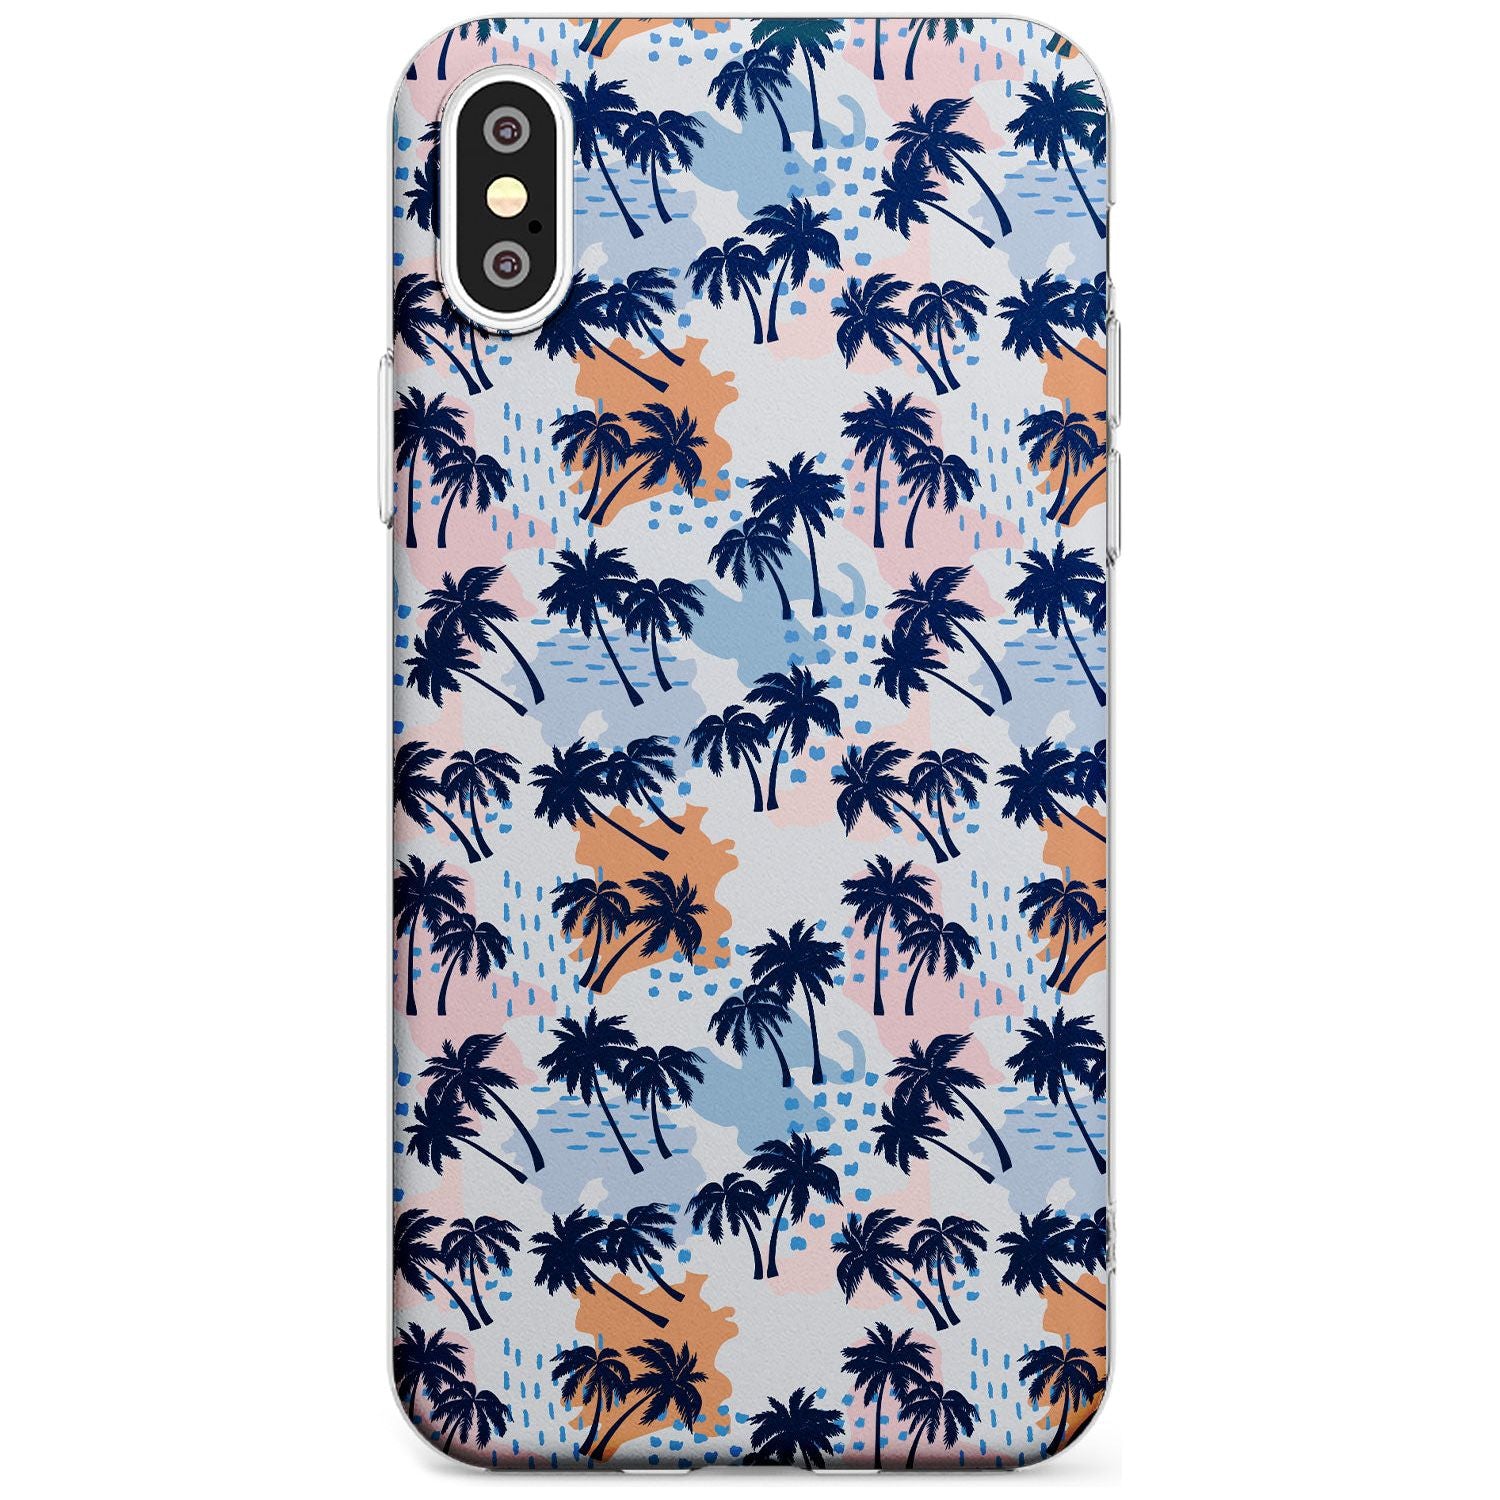 Summer Palm Trees Black Impact Phone Case for iPhone X XS Max XR